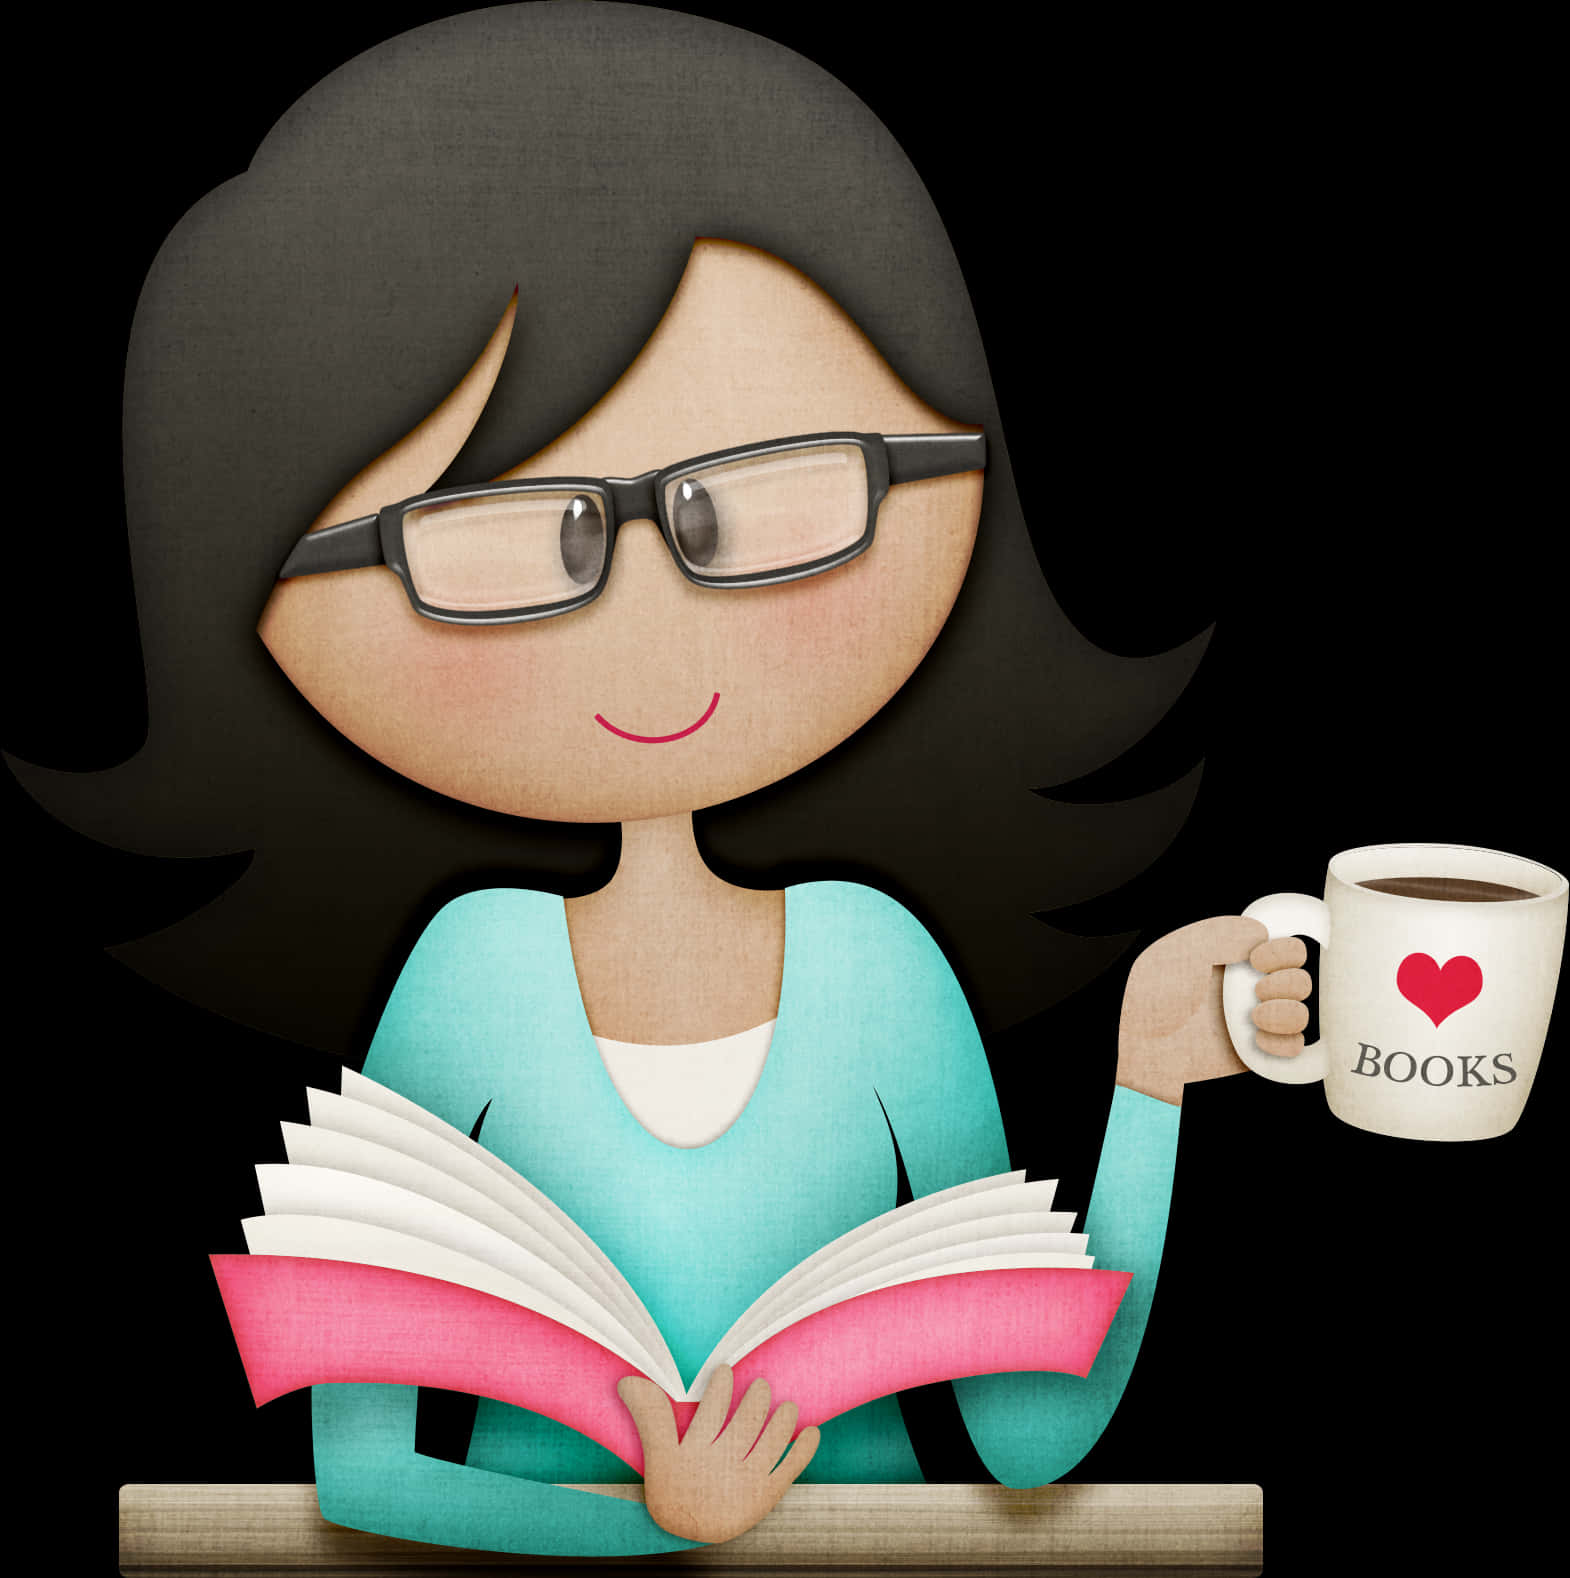 A Cartoon Of A Woman Holding A Book And A Cup Of Coffee